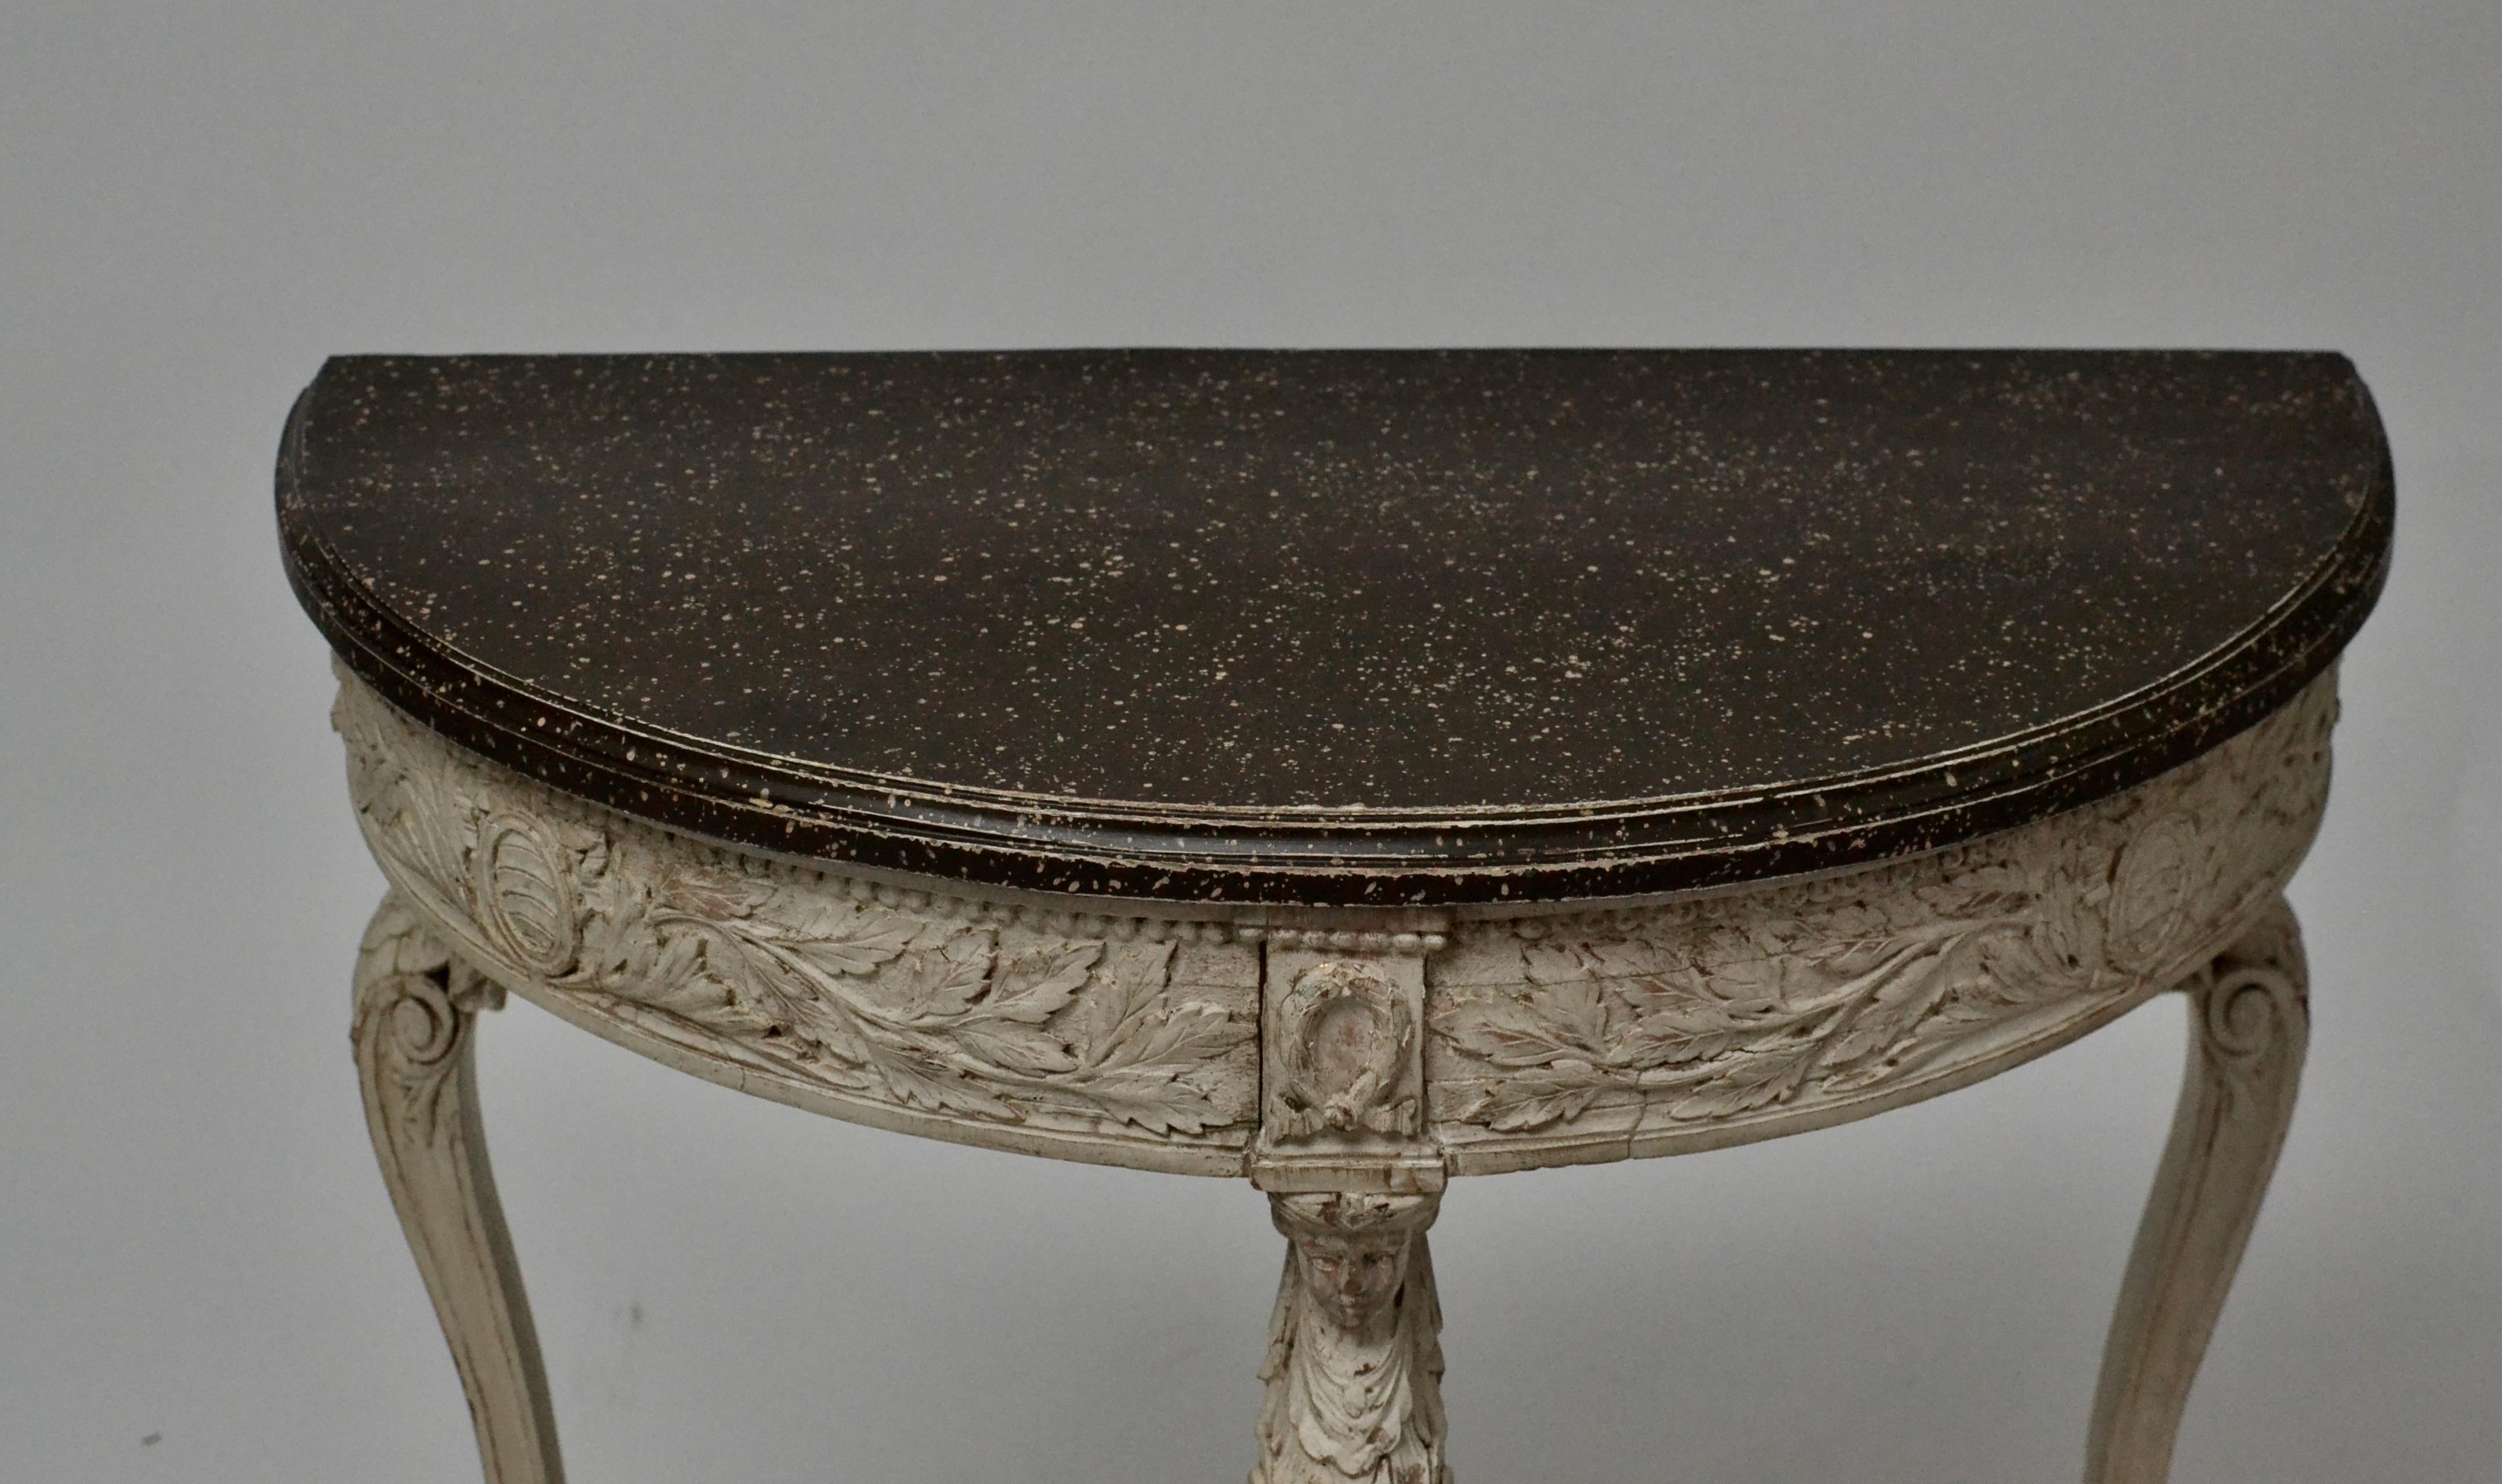 Hand-Carved Gustavian Console Table with a Faux Porphyry Painted Top